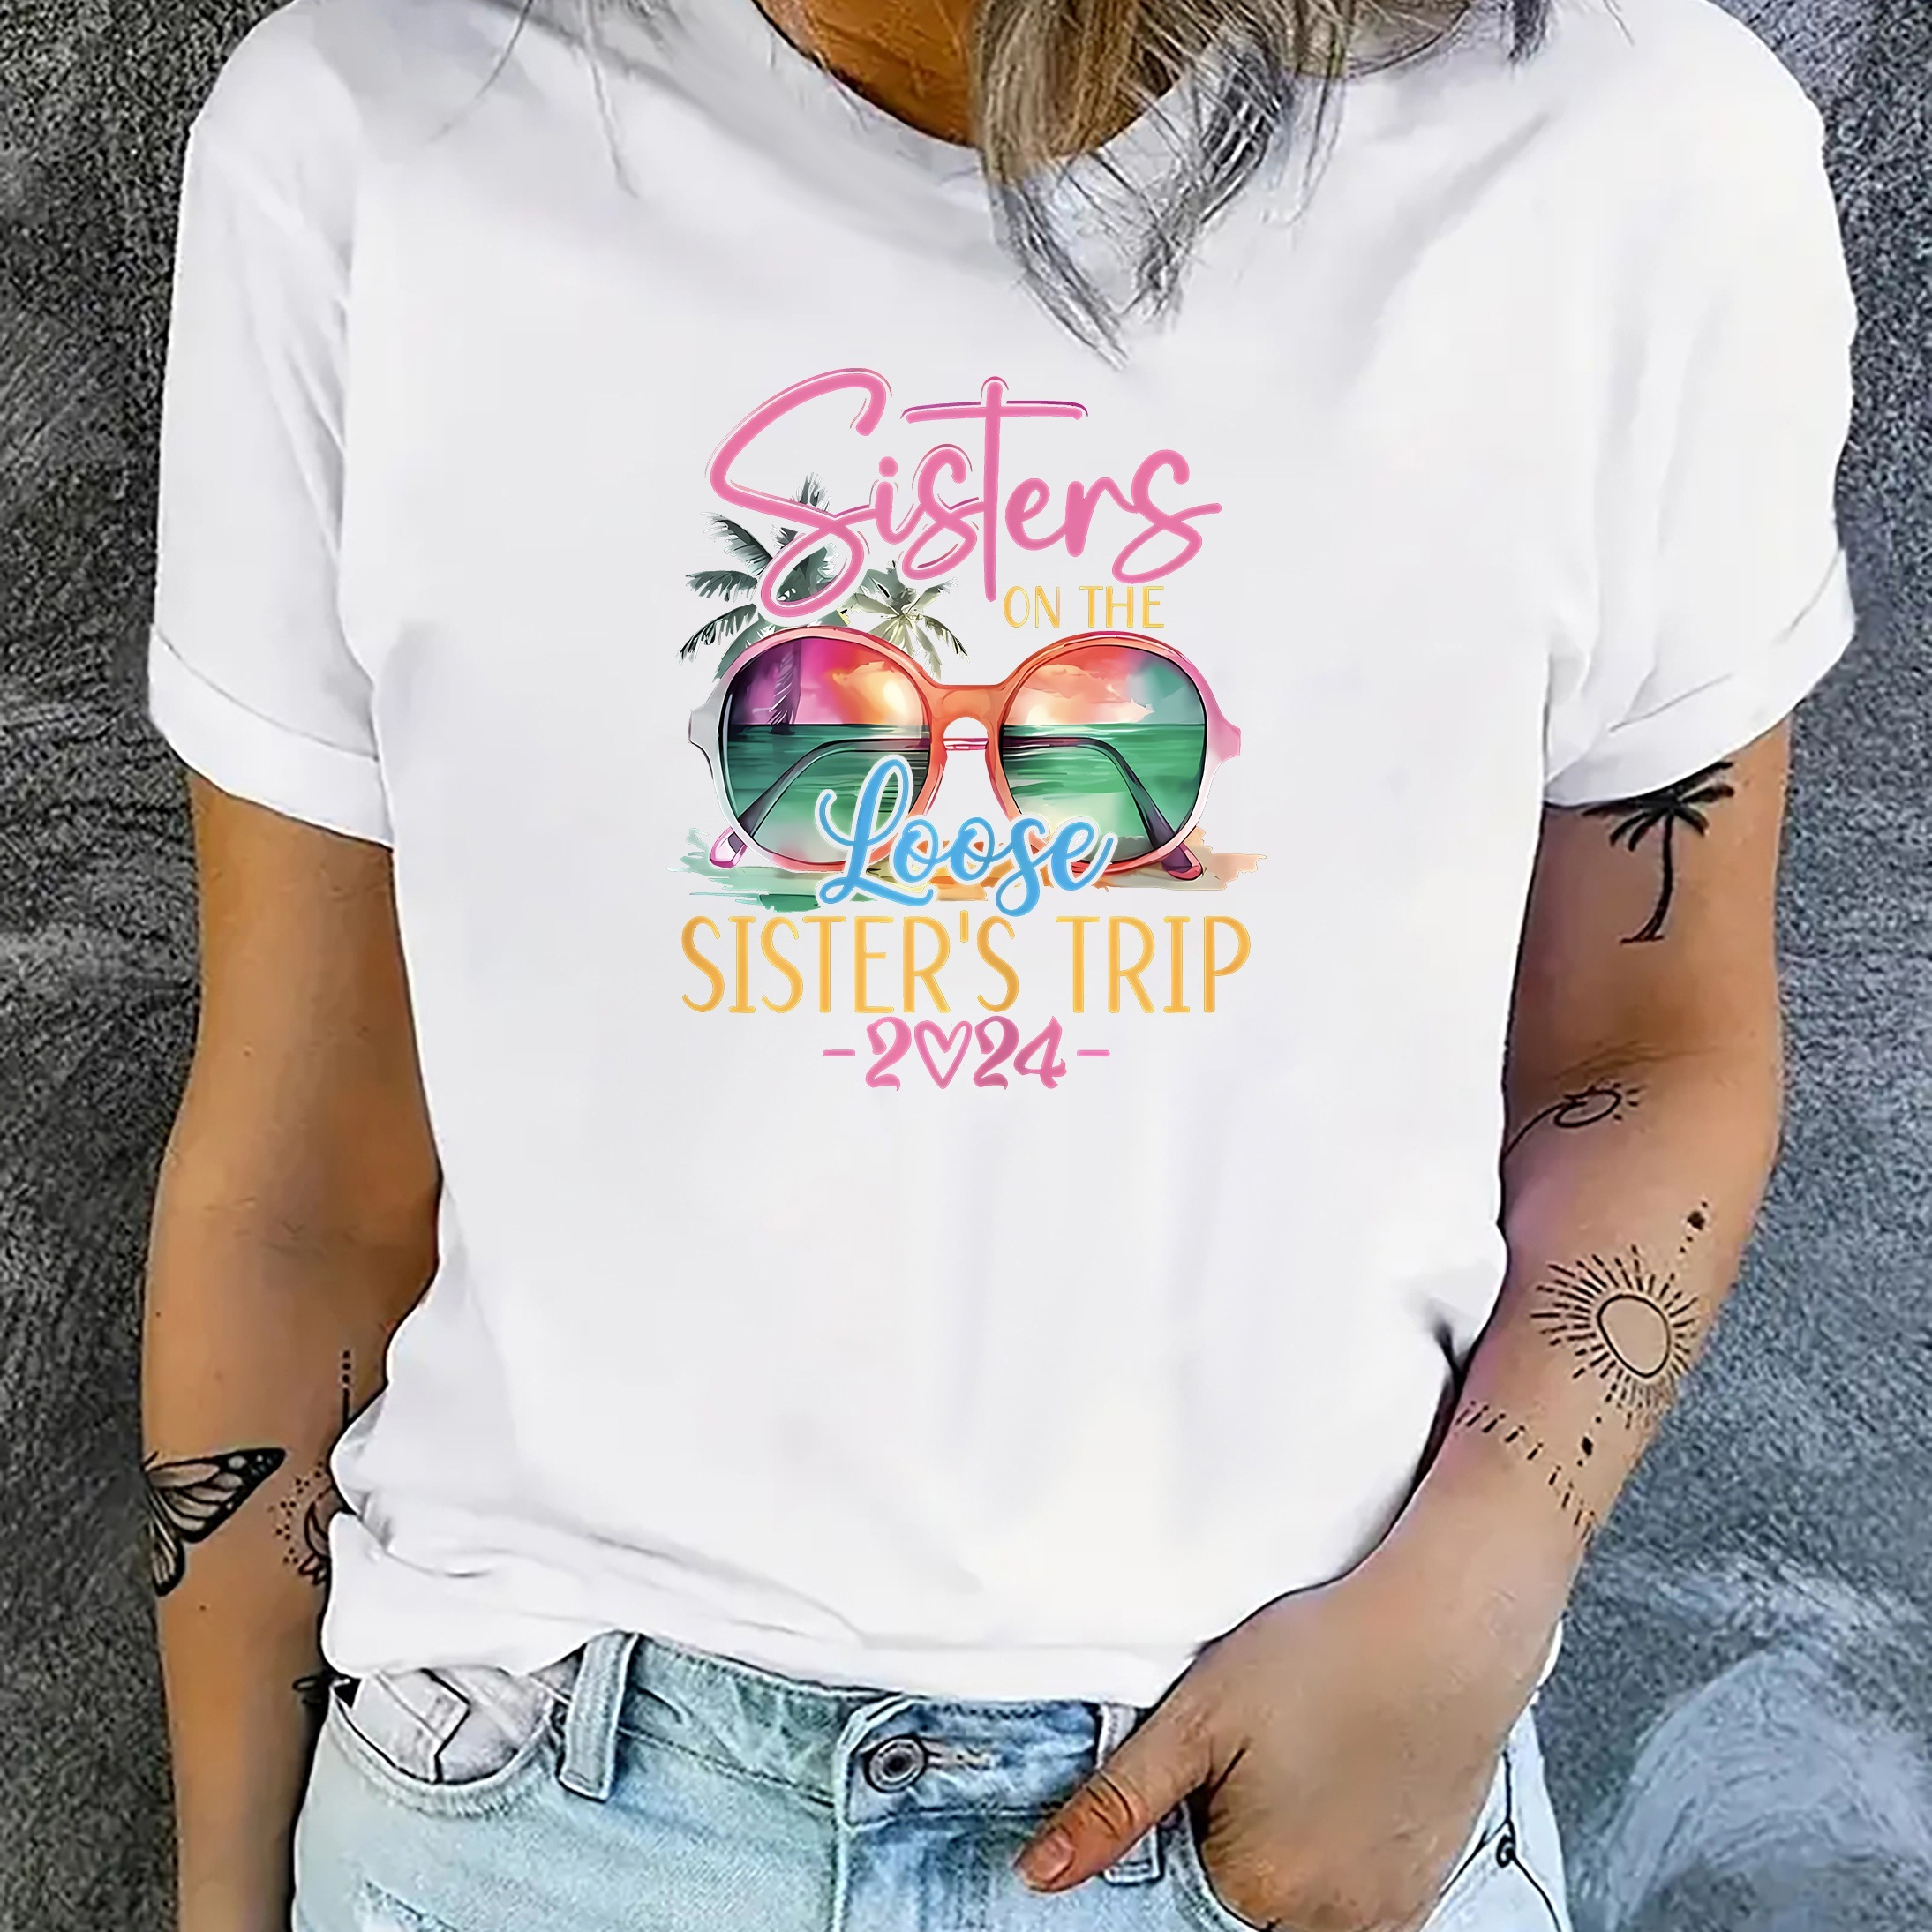 

Women's "sisters On The Loose - Sister's Trip 2024 T-shirt, Casual Fun Bowling Graphic, Round Neck, Short Sleeve, White Tee, Summer Tops For Vacation & Leisure